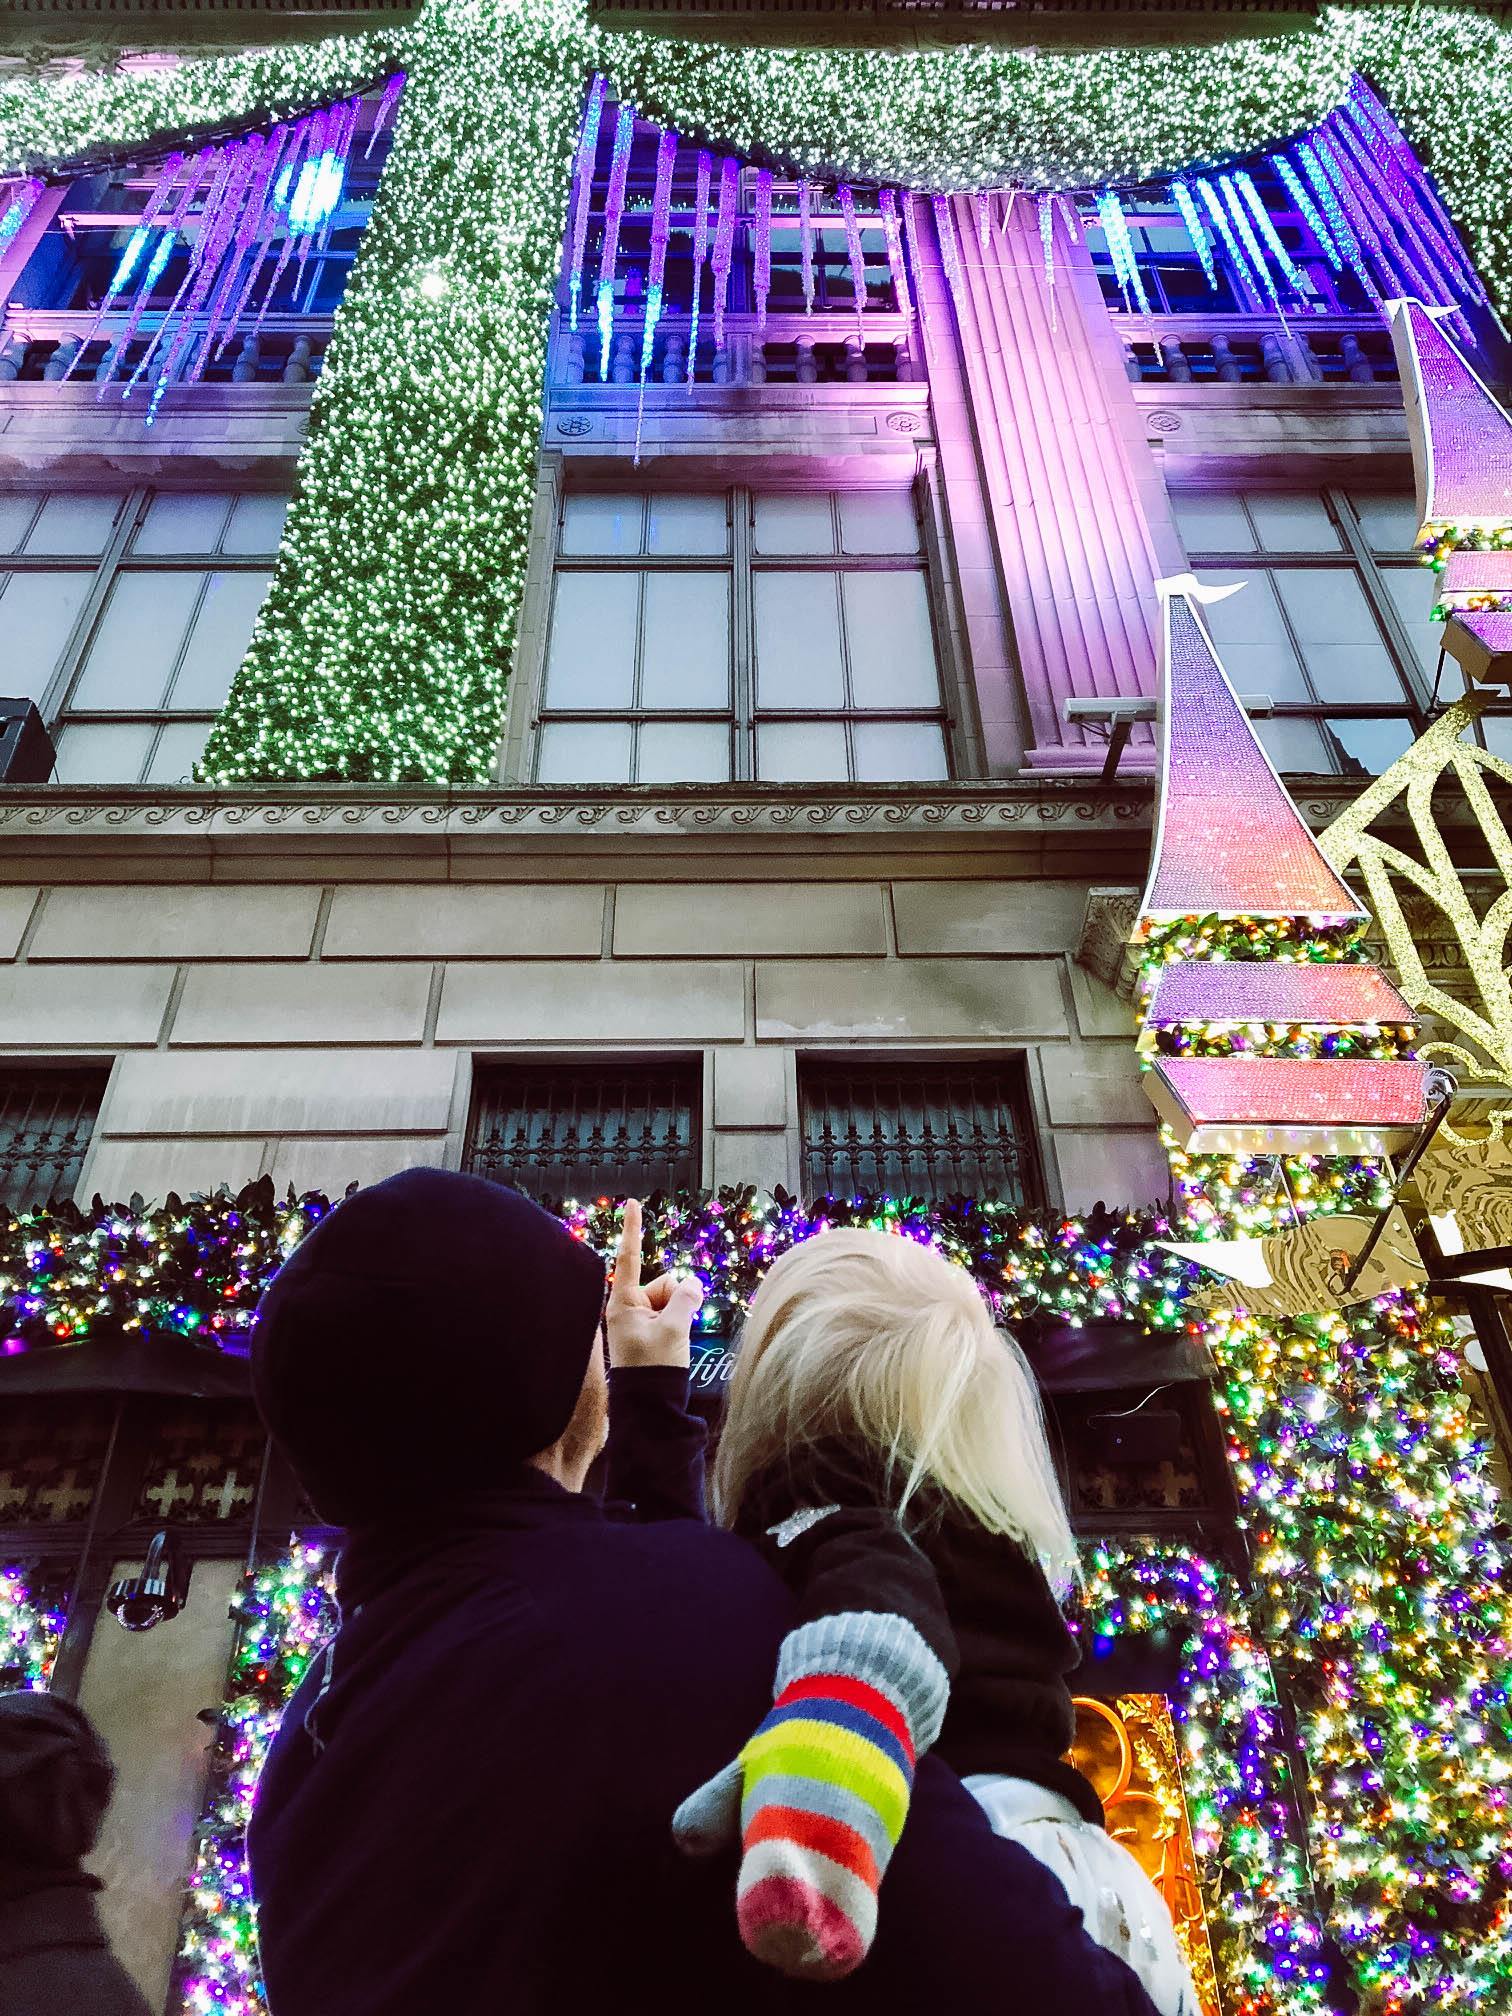 Holidays in New York with Your Family by popular Atlanta blogger Happily Hughes